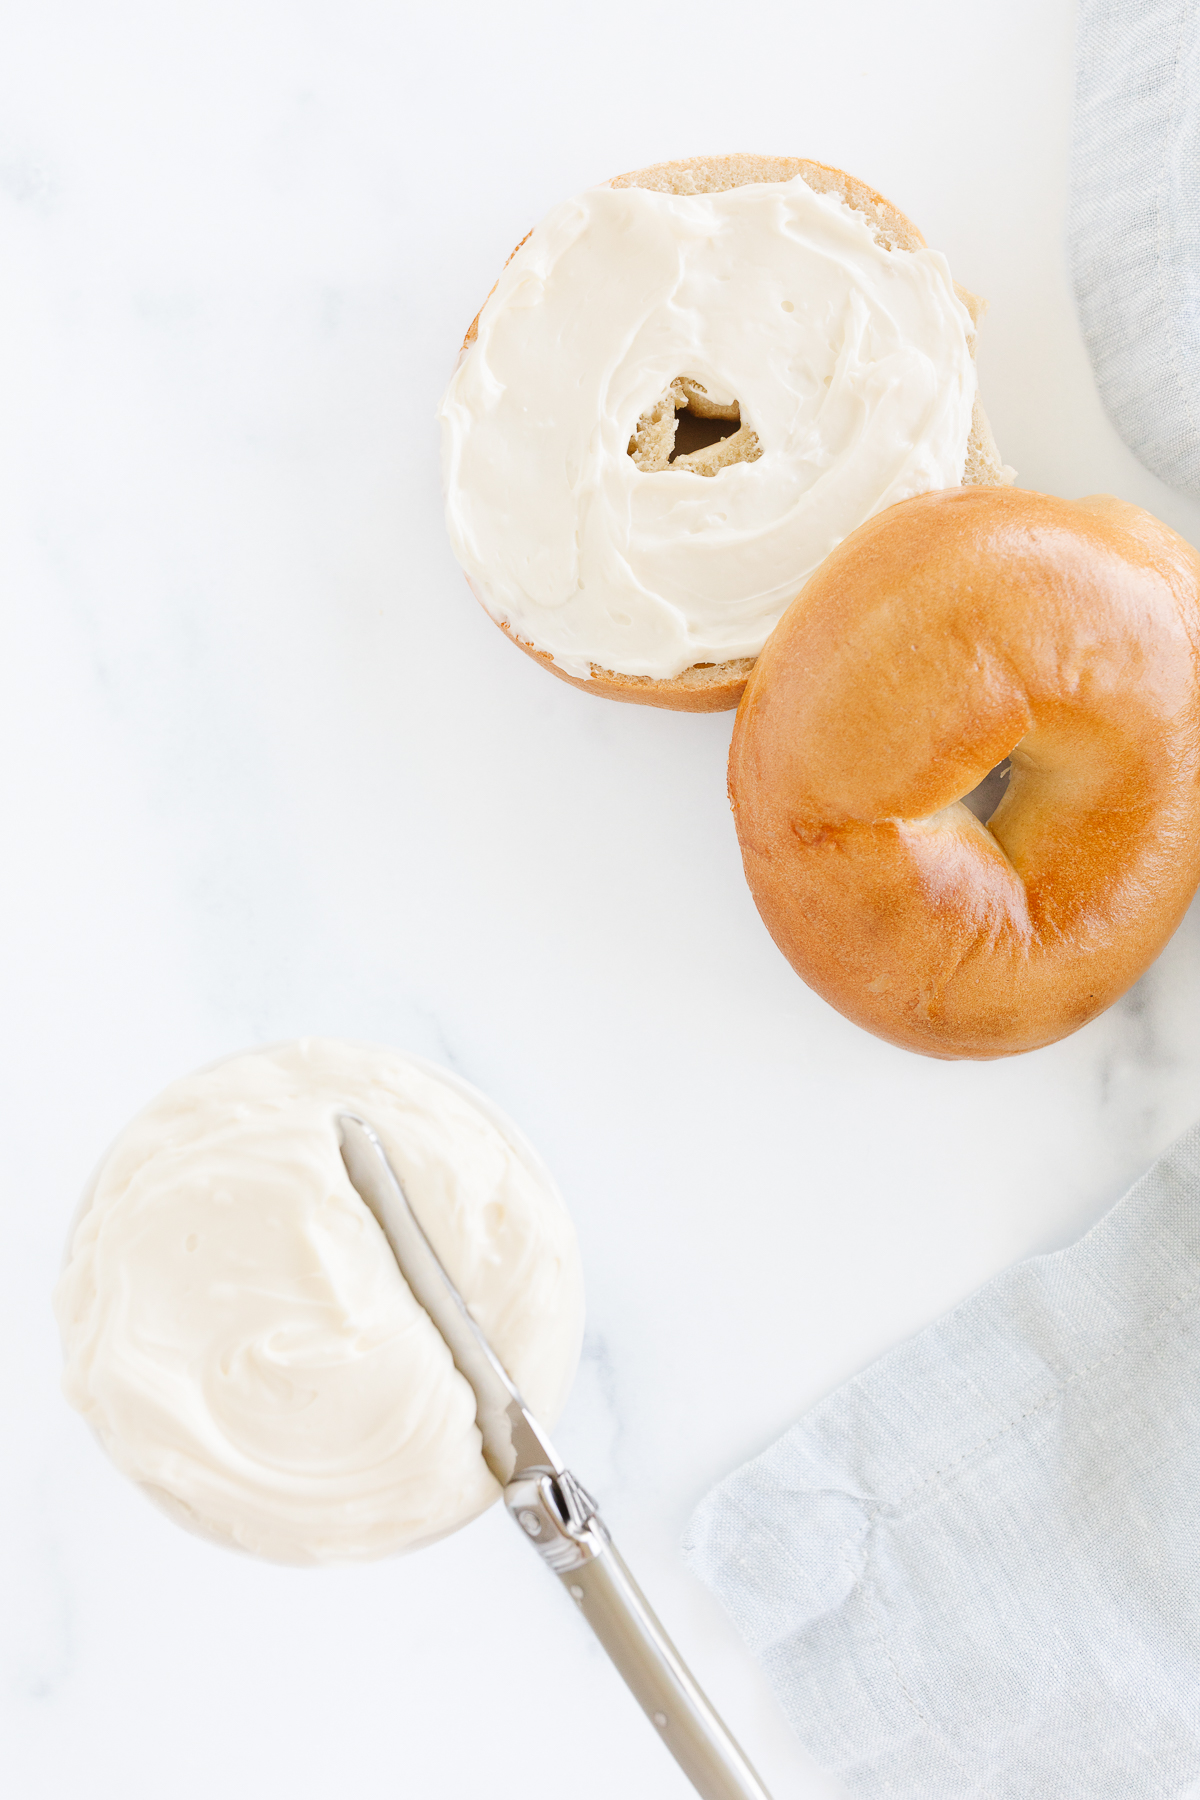 A whipped cream cheese bagel with a knife next to it.